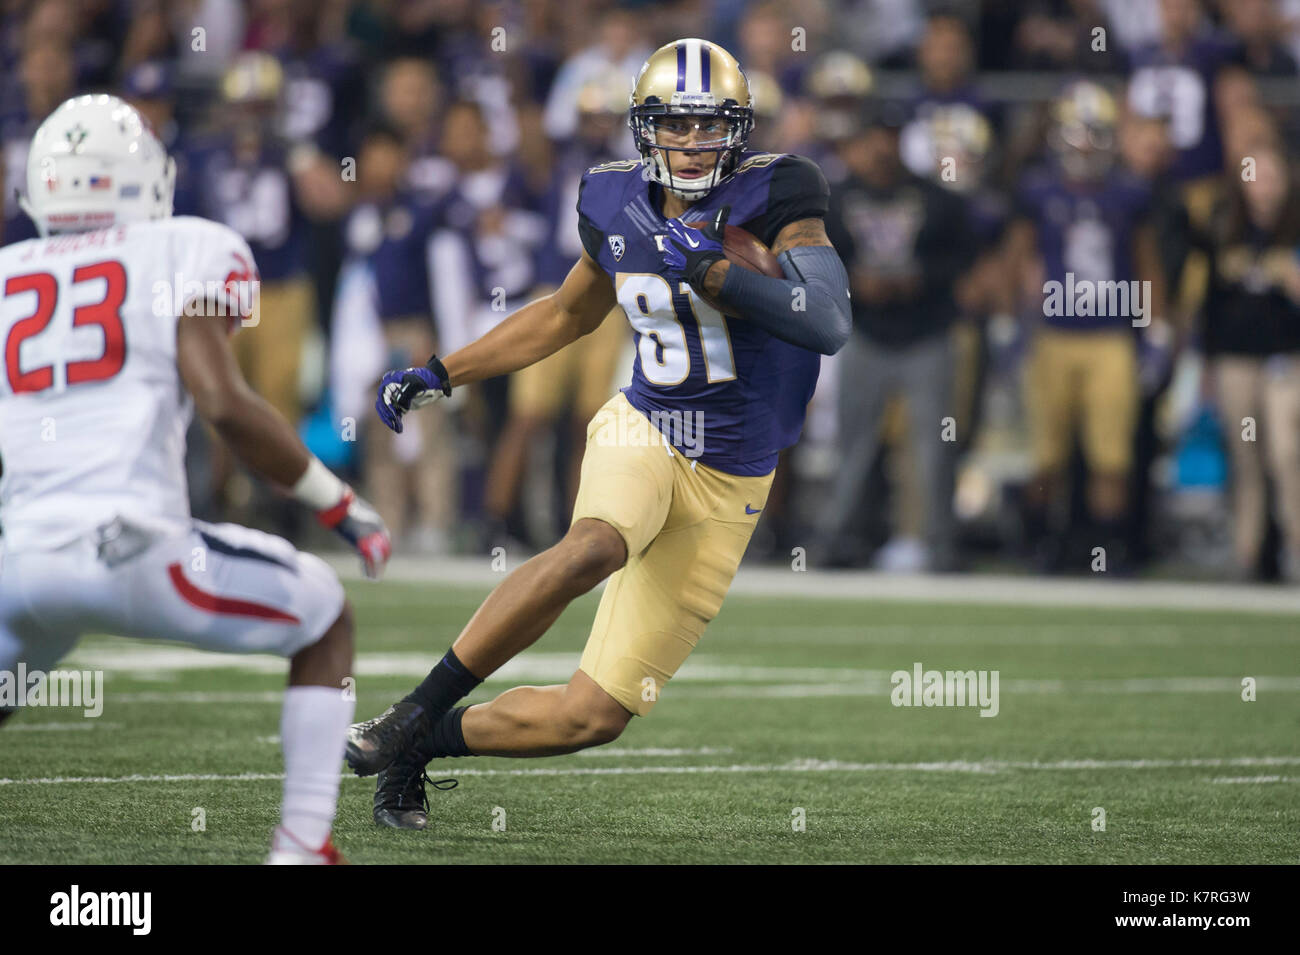 Seattle, WA, USA. 16th Sep, 2017. UW receiver Brayden Lenius (81) in action during a NCAA football game between the Fresno State Bulldogs and the Washington Huskies. The game was played at Husky Stadium in Seattle, WA. Jeff Halstead/CSM/Alamy Live News Stock Photo